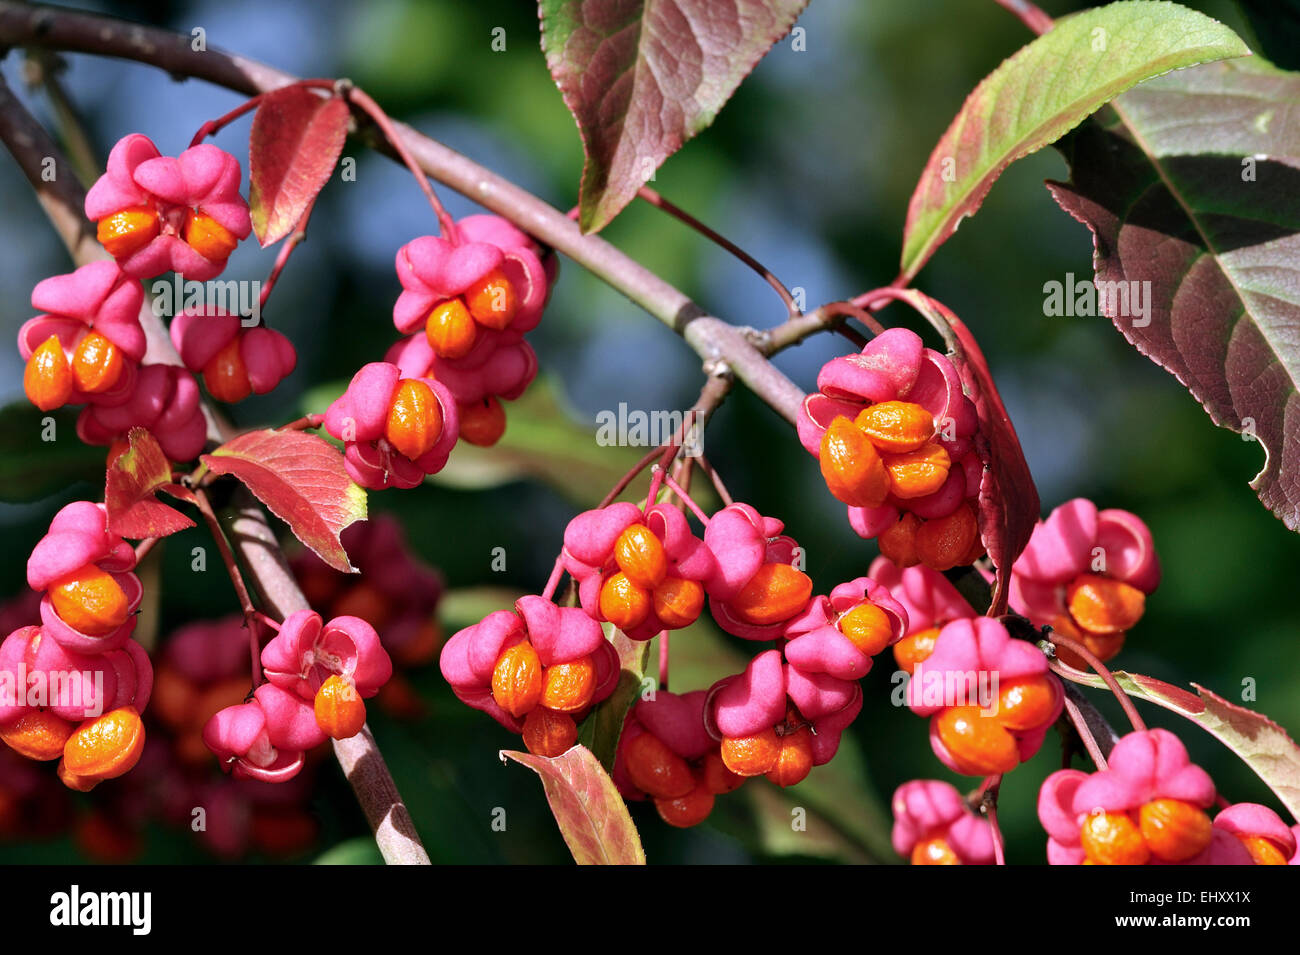 European spindle / common spindle (Euonymus europaeus) in autumn showing capsular fruit with lobes split open to reveal seeds Stock Photo